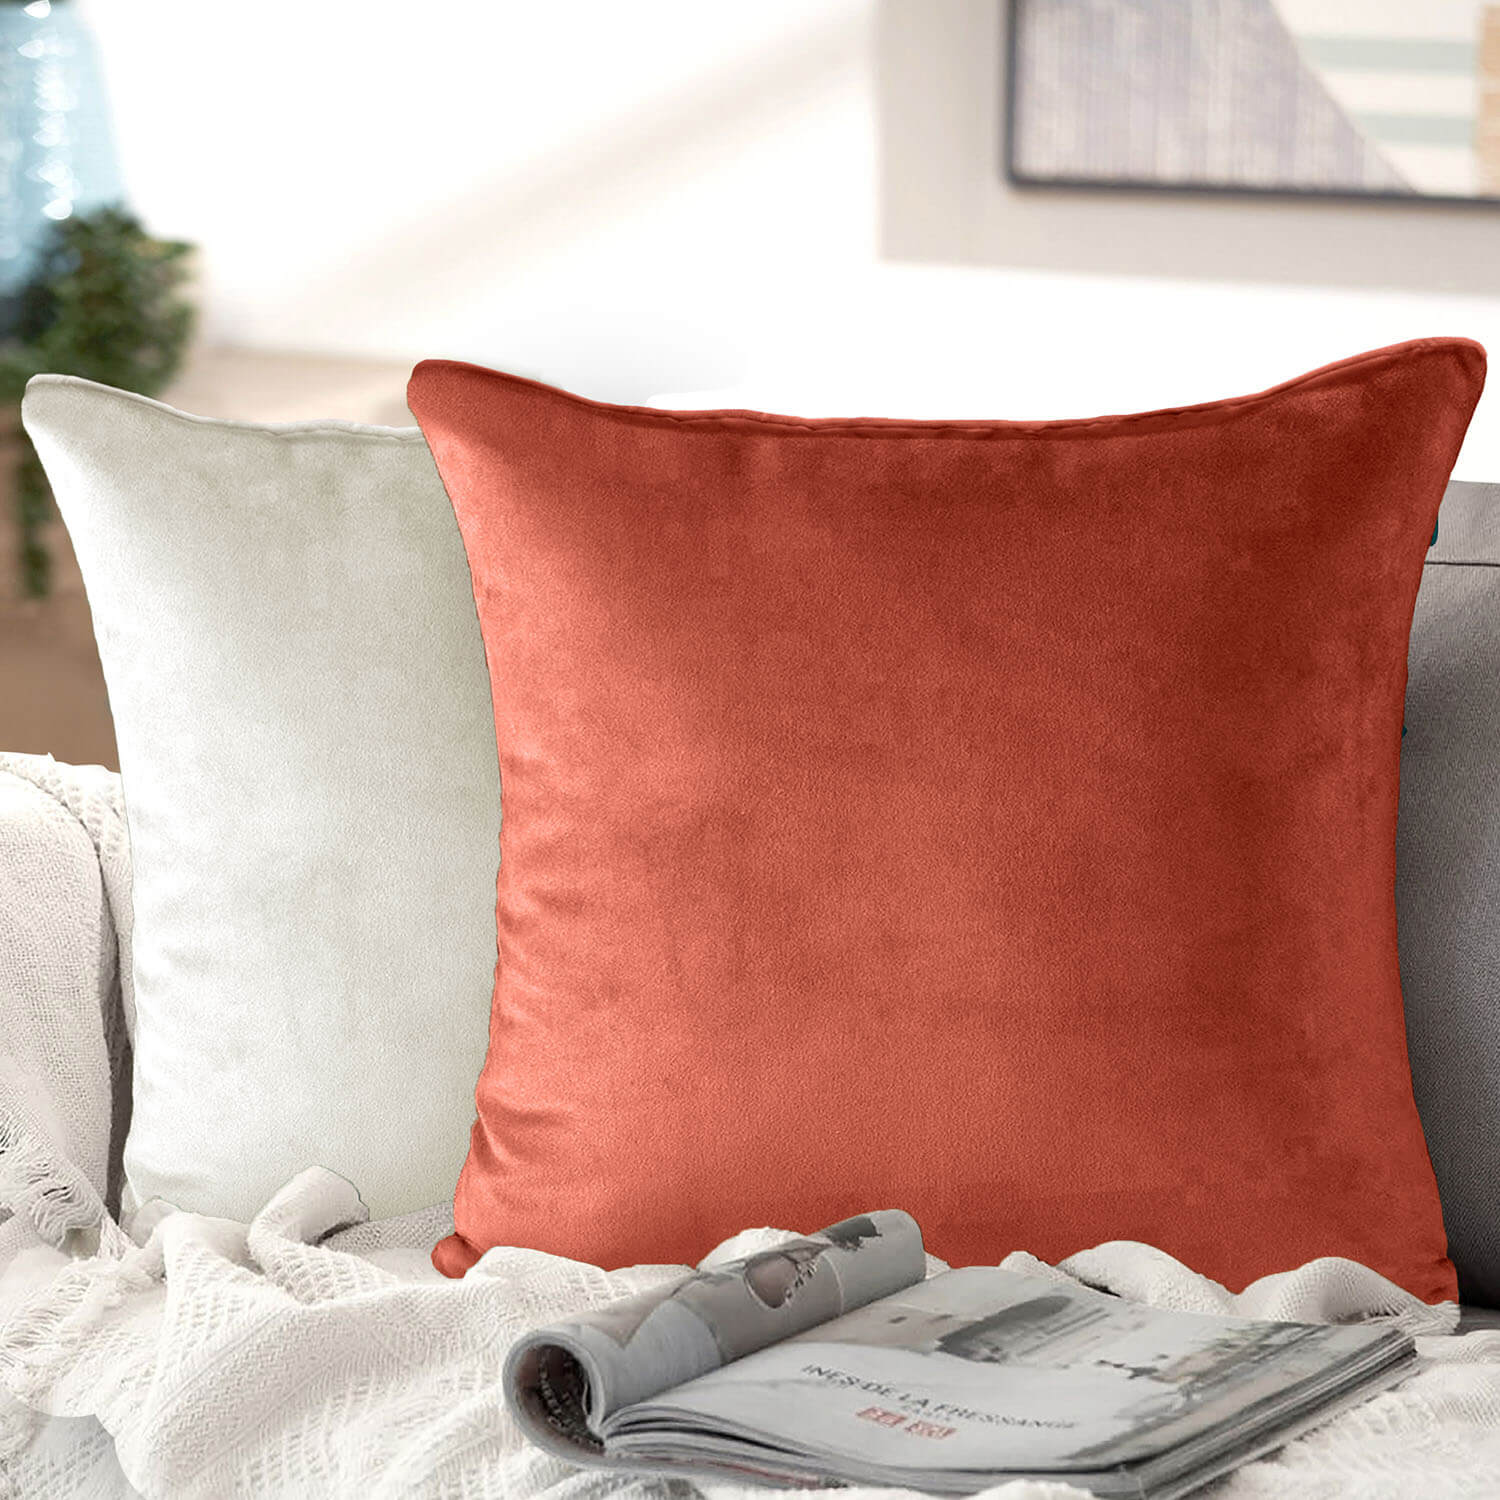 The Home Collection Luna Velvet Cushion - Teracotta/Cream 1 Shaws Department Stores